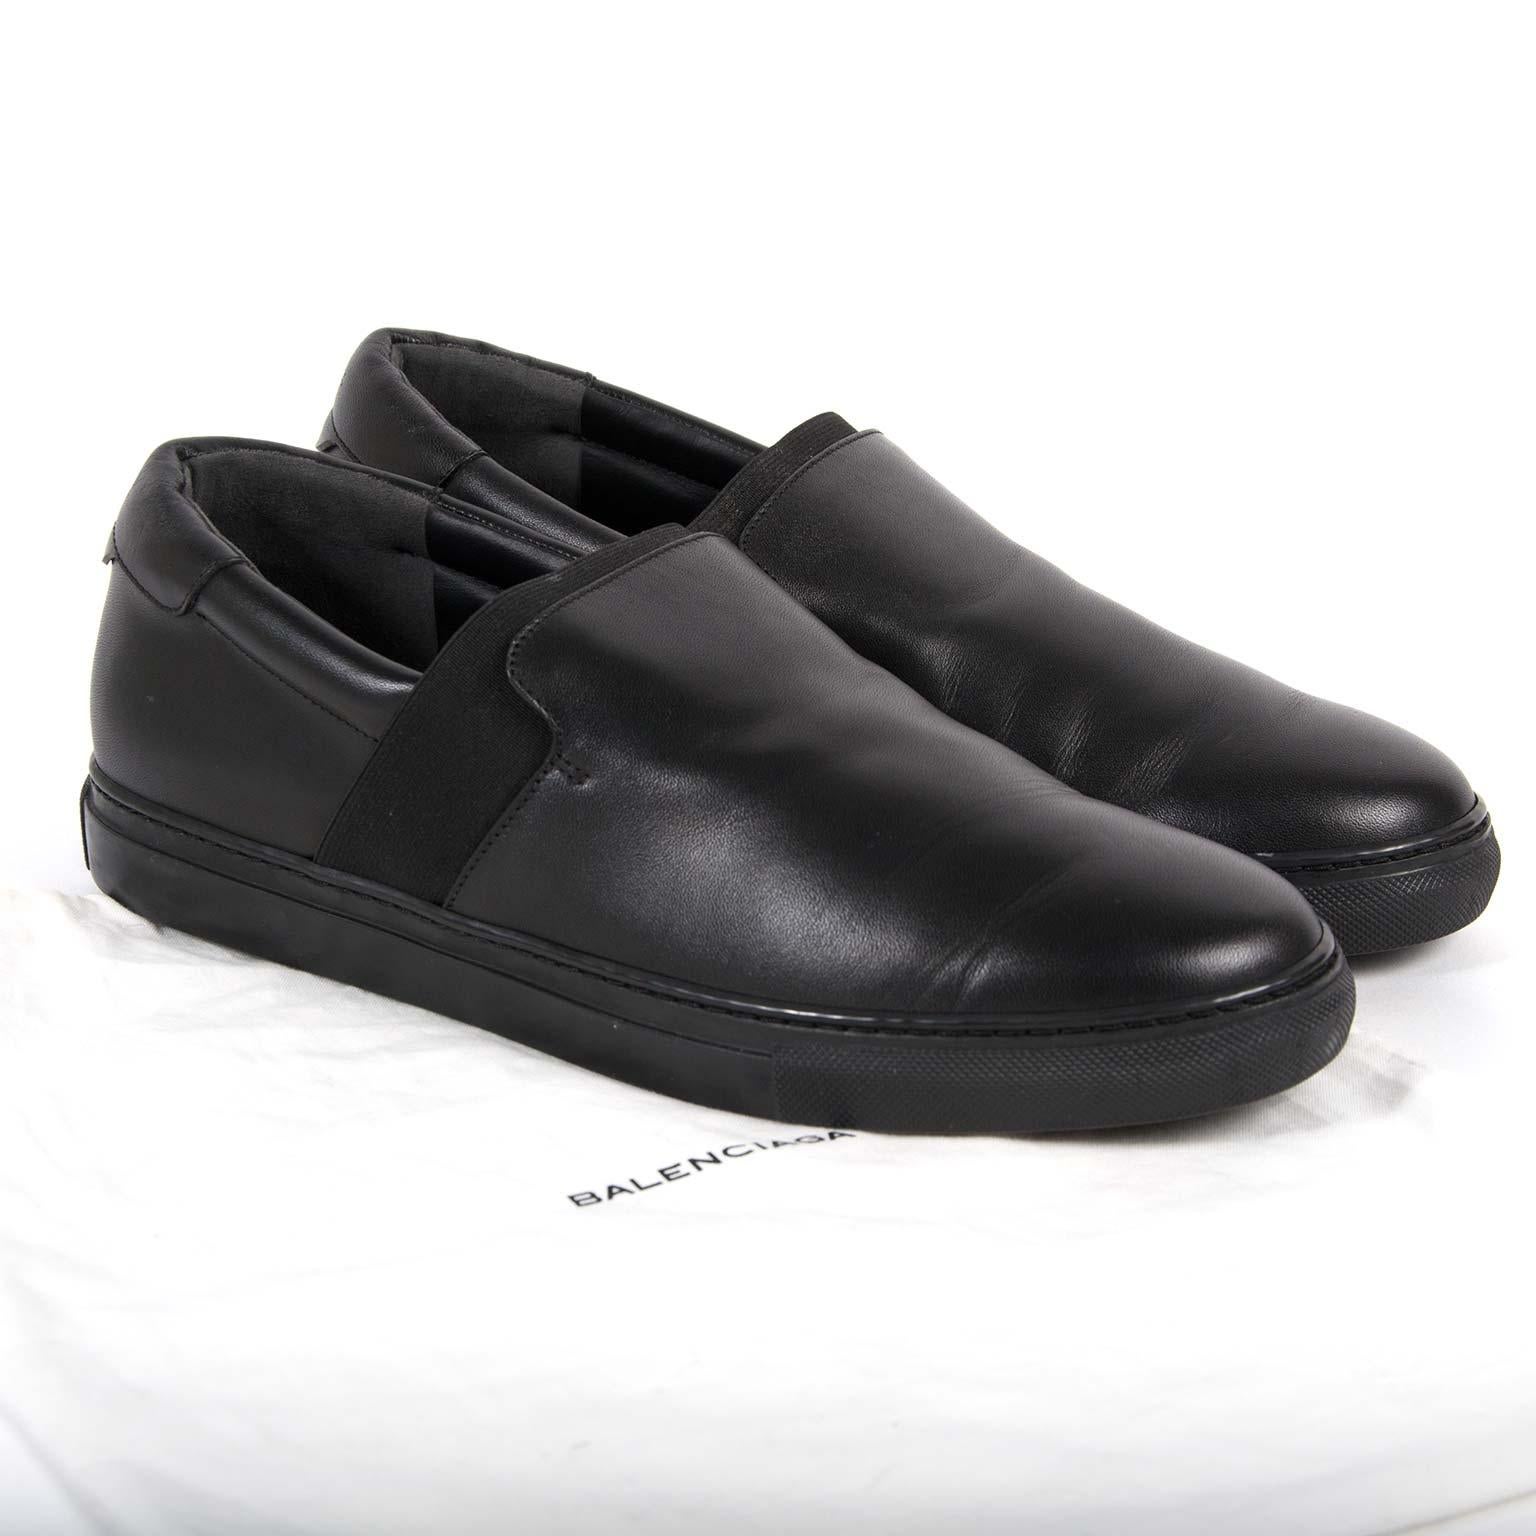 Brand New!

Balenciaga Black Leather Slip-On Sneakers - Size 41

These gorgeous slip-on sneakers by Balenciaga are crafted in black leather and feature an elastic band.
The perfect pair of comfy, stylish shoes to complete any outfit!
P.s. they are